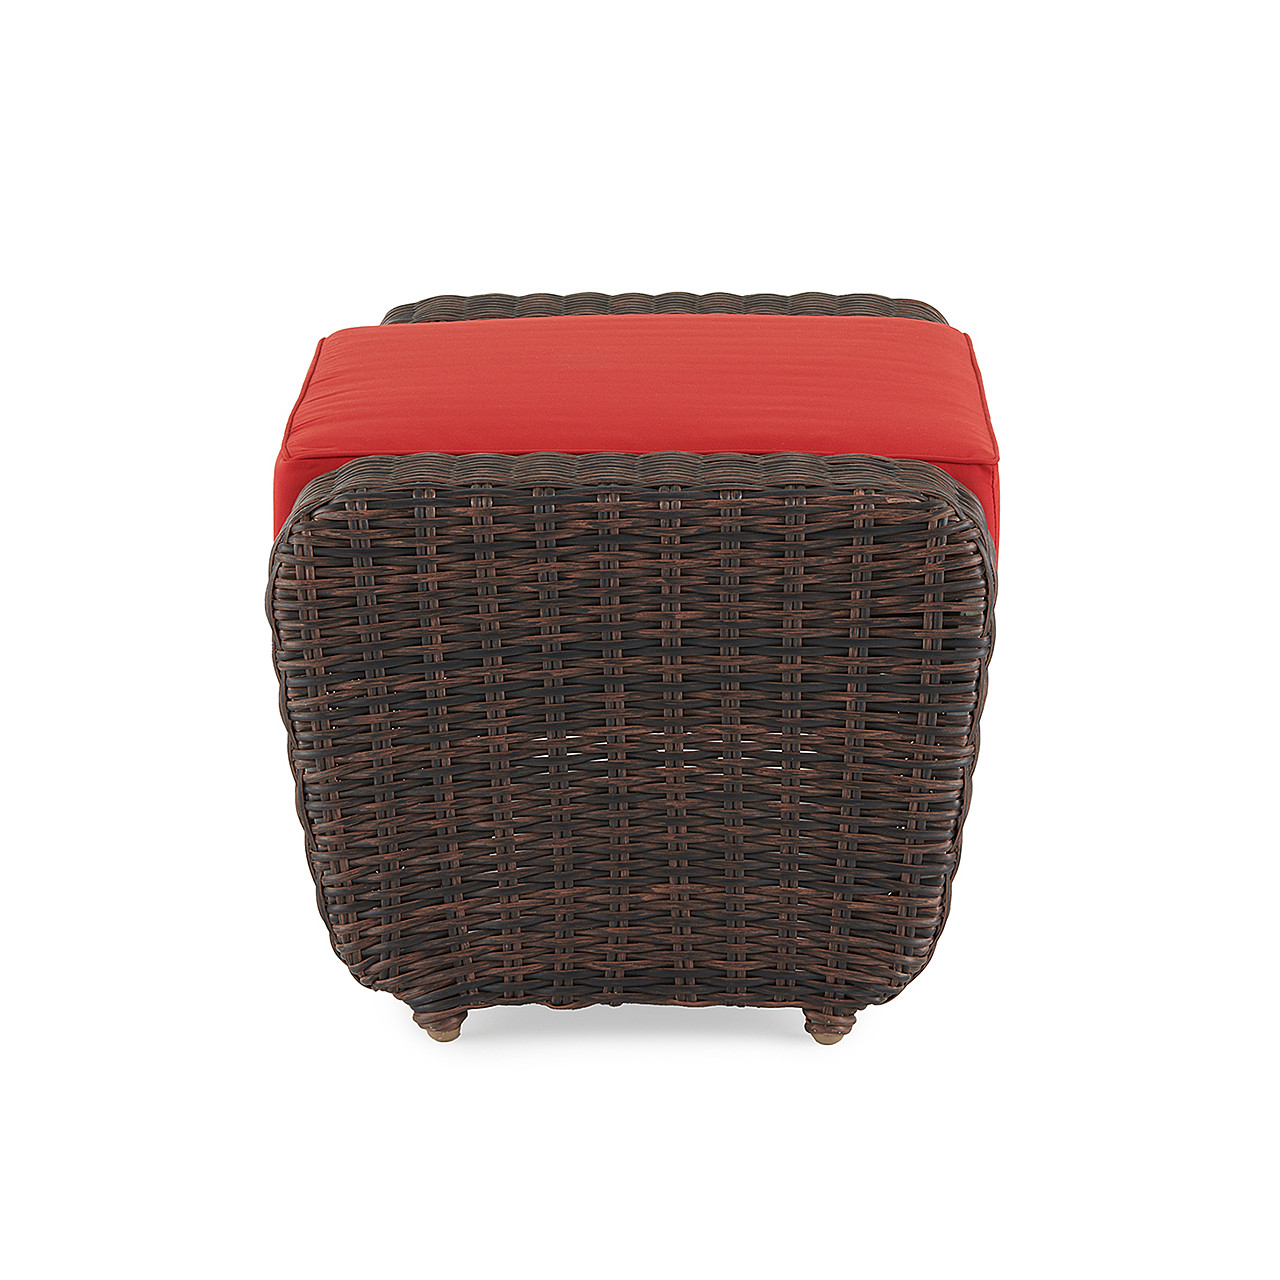 Valencia Sangria Outdoor Wicker and Jockey Red Cushion Large Ottoman